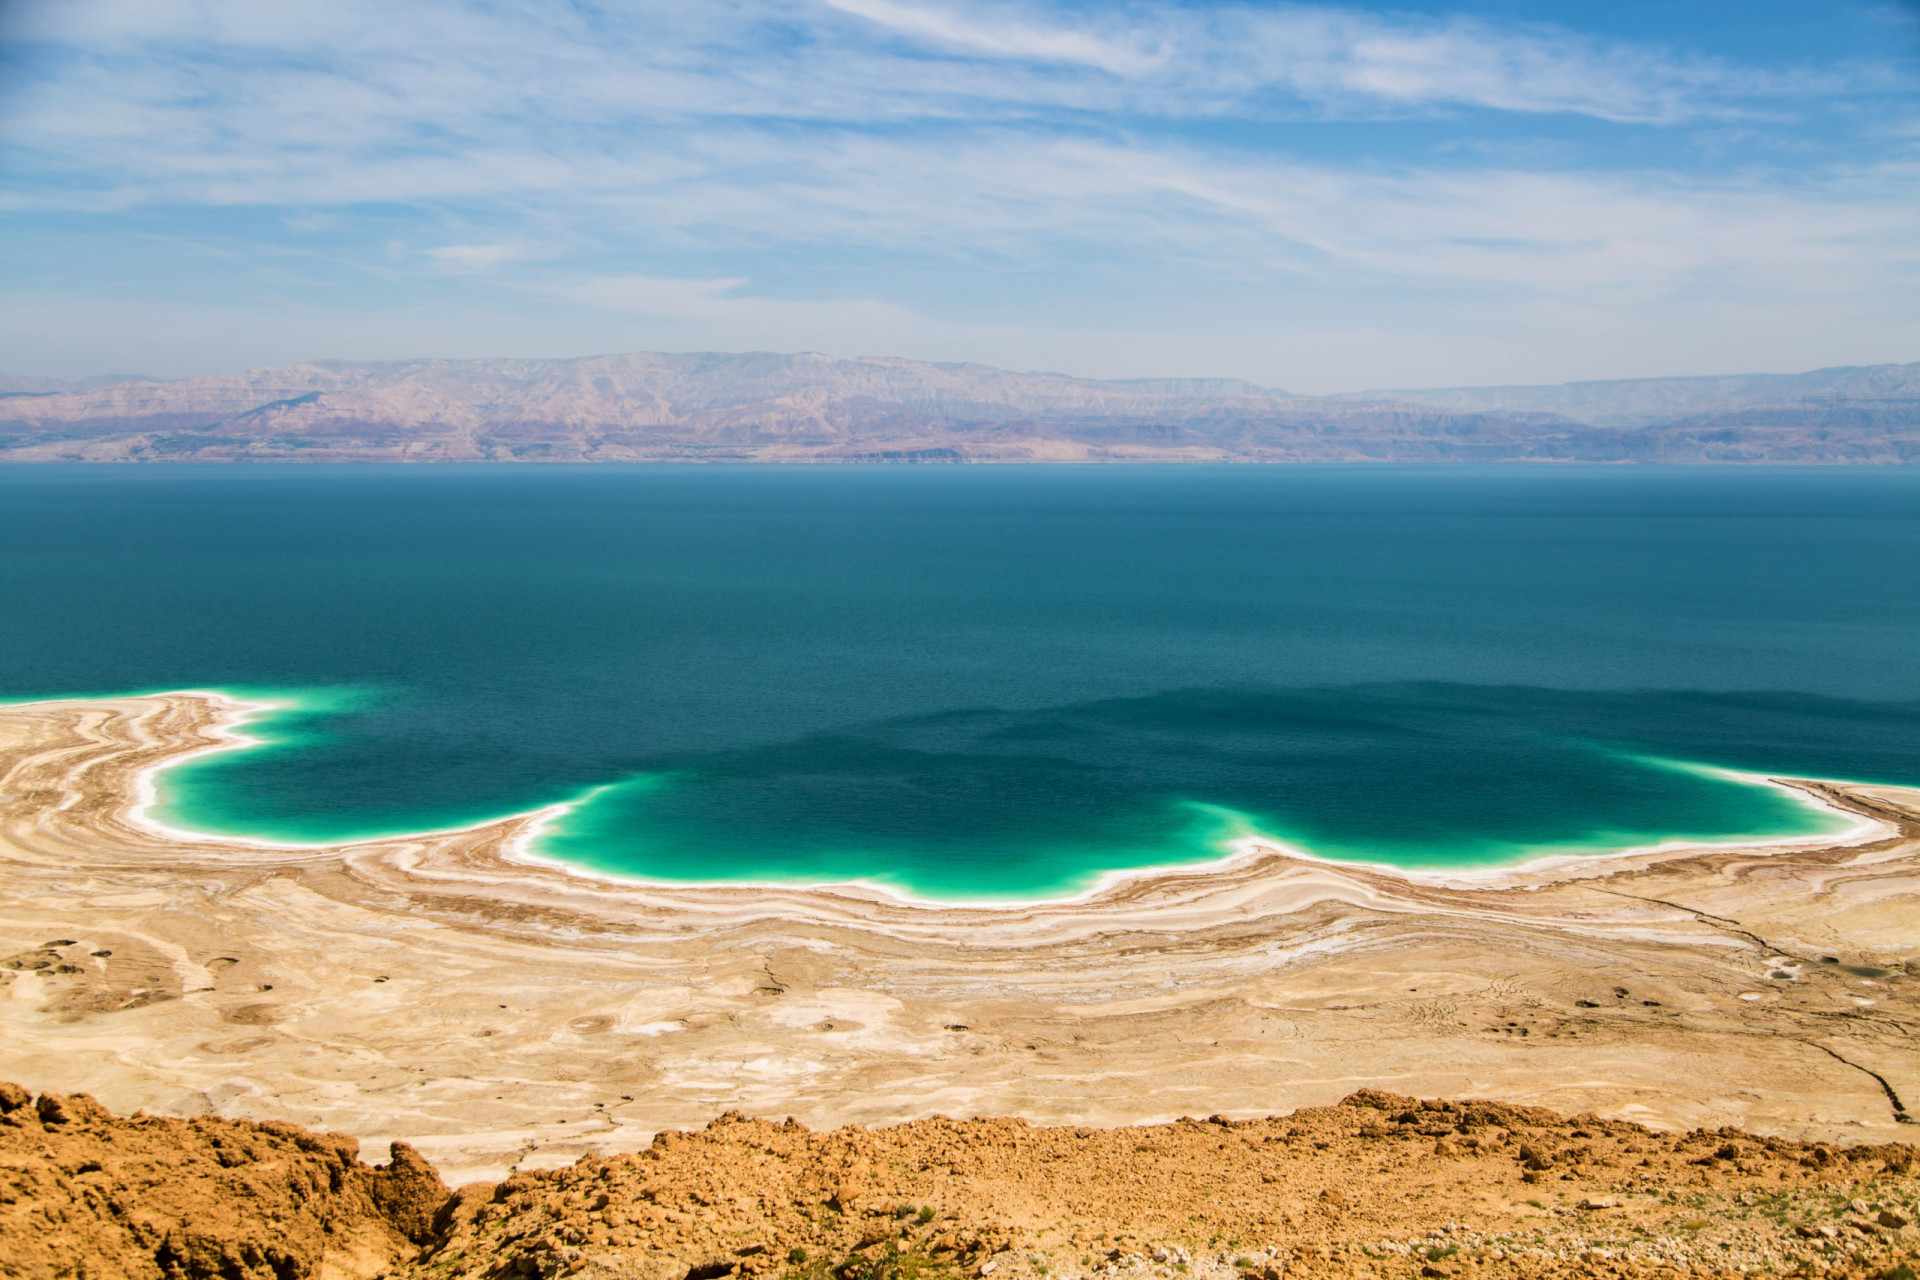 <p>The fabled Dead Sea is a salt lake set 427 m (1,400 ft) below sea level—Earth's lowest elevation on land.</p><p><a href="https://www.msn.com/en-us/community/channel/vid-7xx8mnucu55yw63we9va2gwr7uihbxwc68fxqp25x6tg4ftibpra?cvid=94631541bc0f4f89bfd59158d696ad7e">Follow us and access great exclusive content every day</a></p>